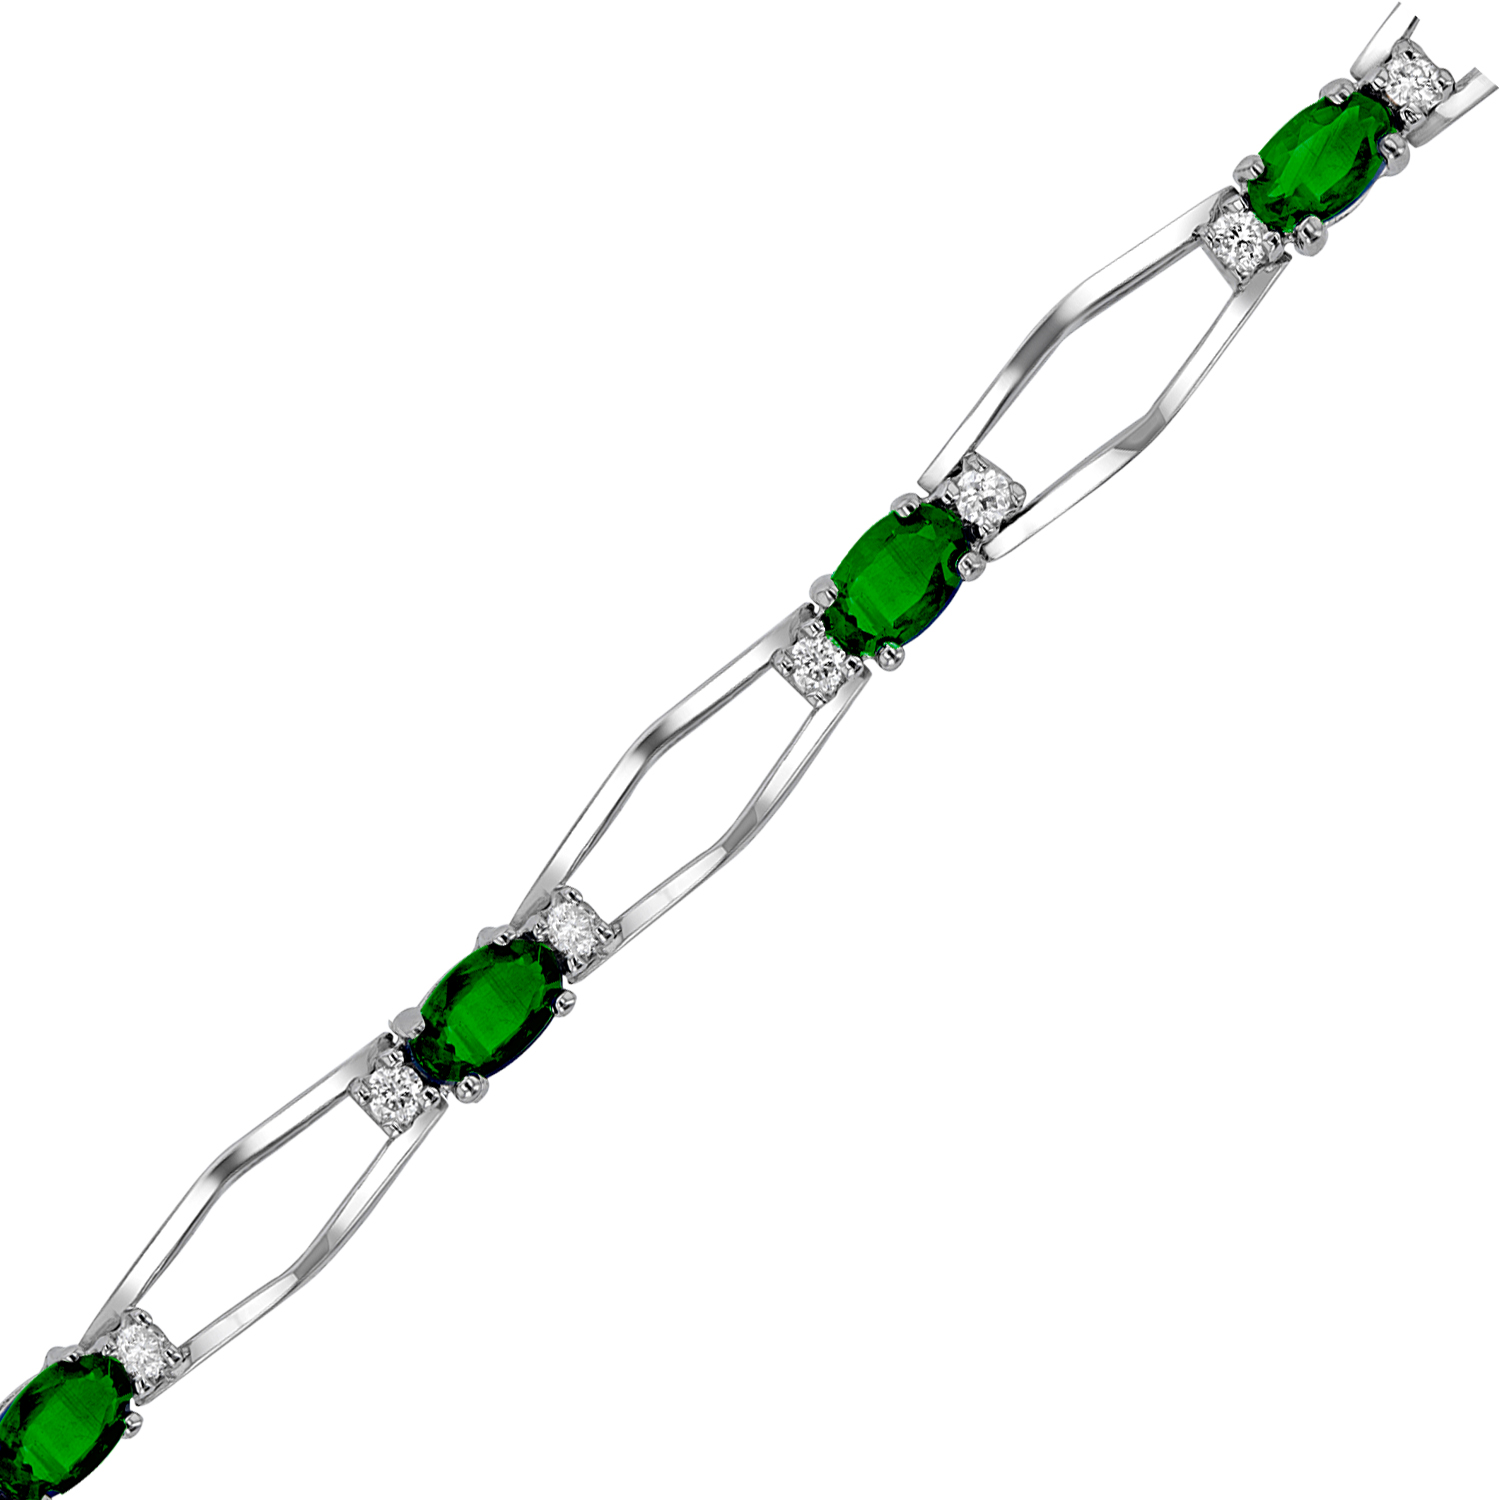 View 2.90ctw Diamond and Emerald Bracelet in 14k White Gold